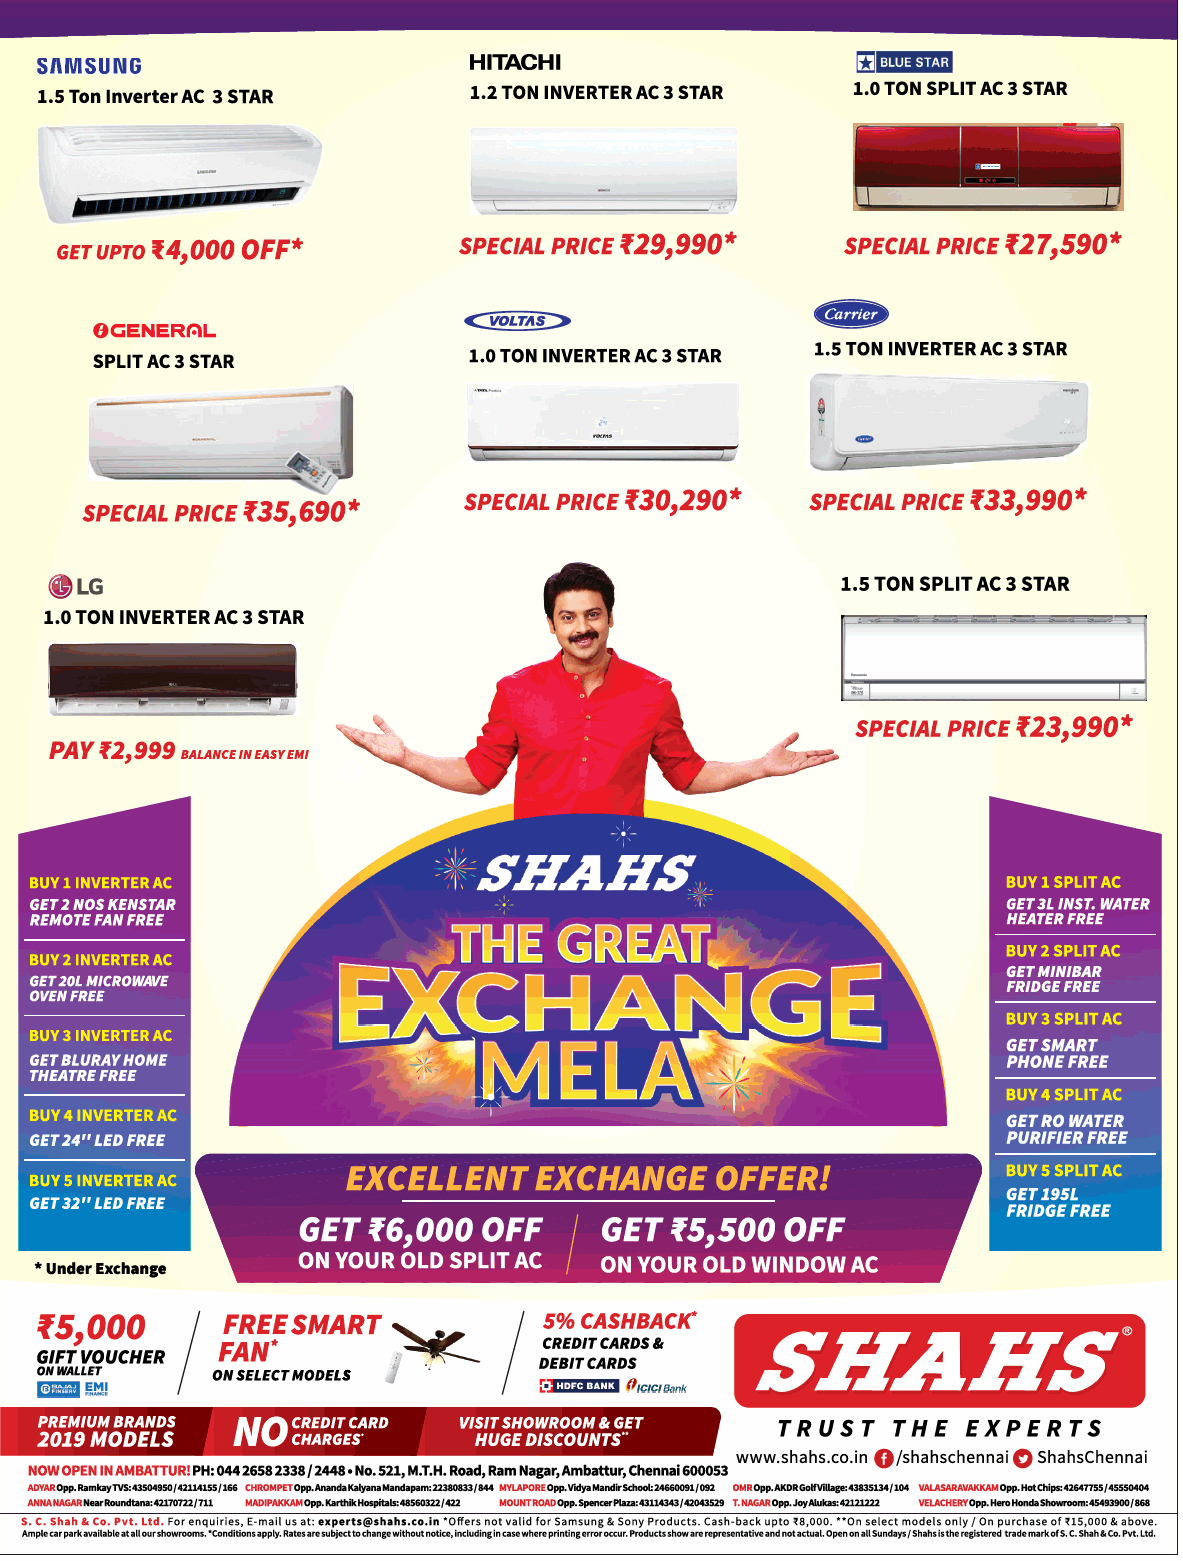 shahs-the-great-exchange-mela-excellent-exchange-offer-ad-chennai-times-09-02-2019.png